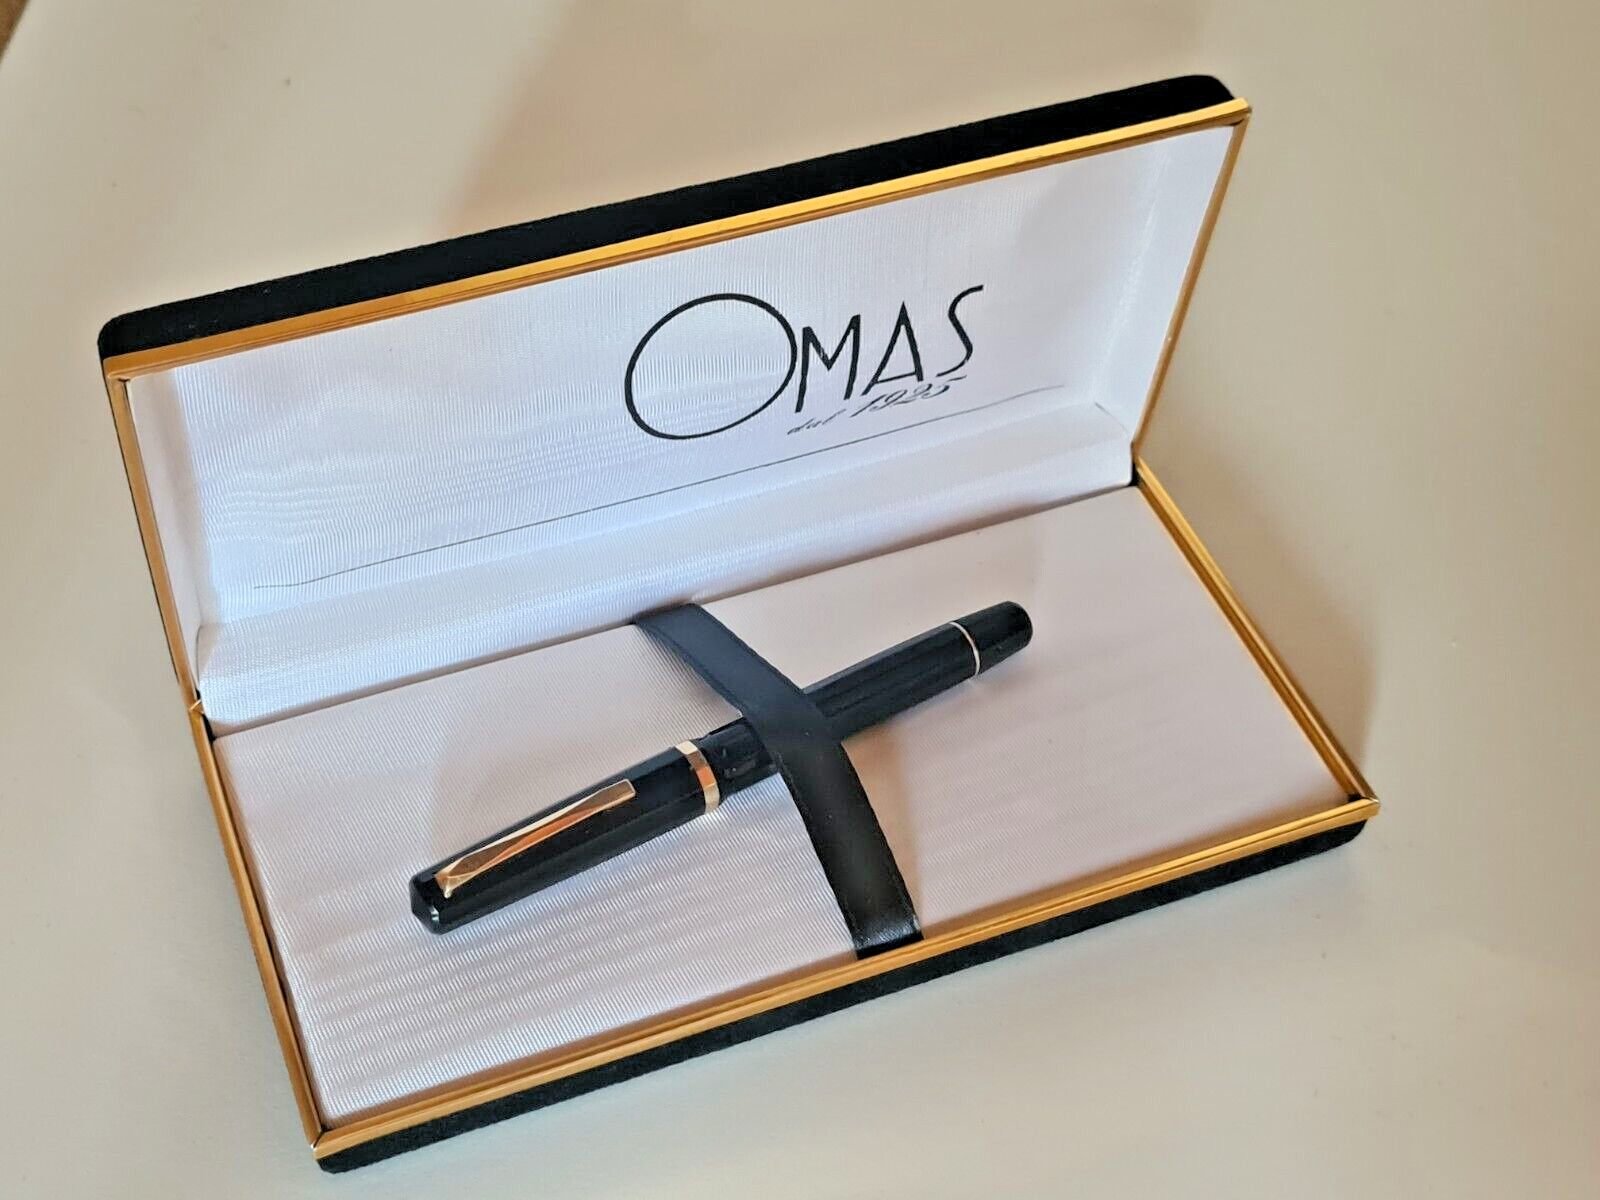 OMAS EXTRA Lady, vintage fountain pen, 585 Extra Lucens nib, 4.44 inches